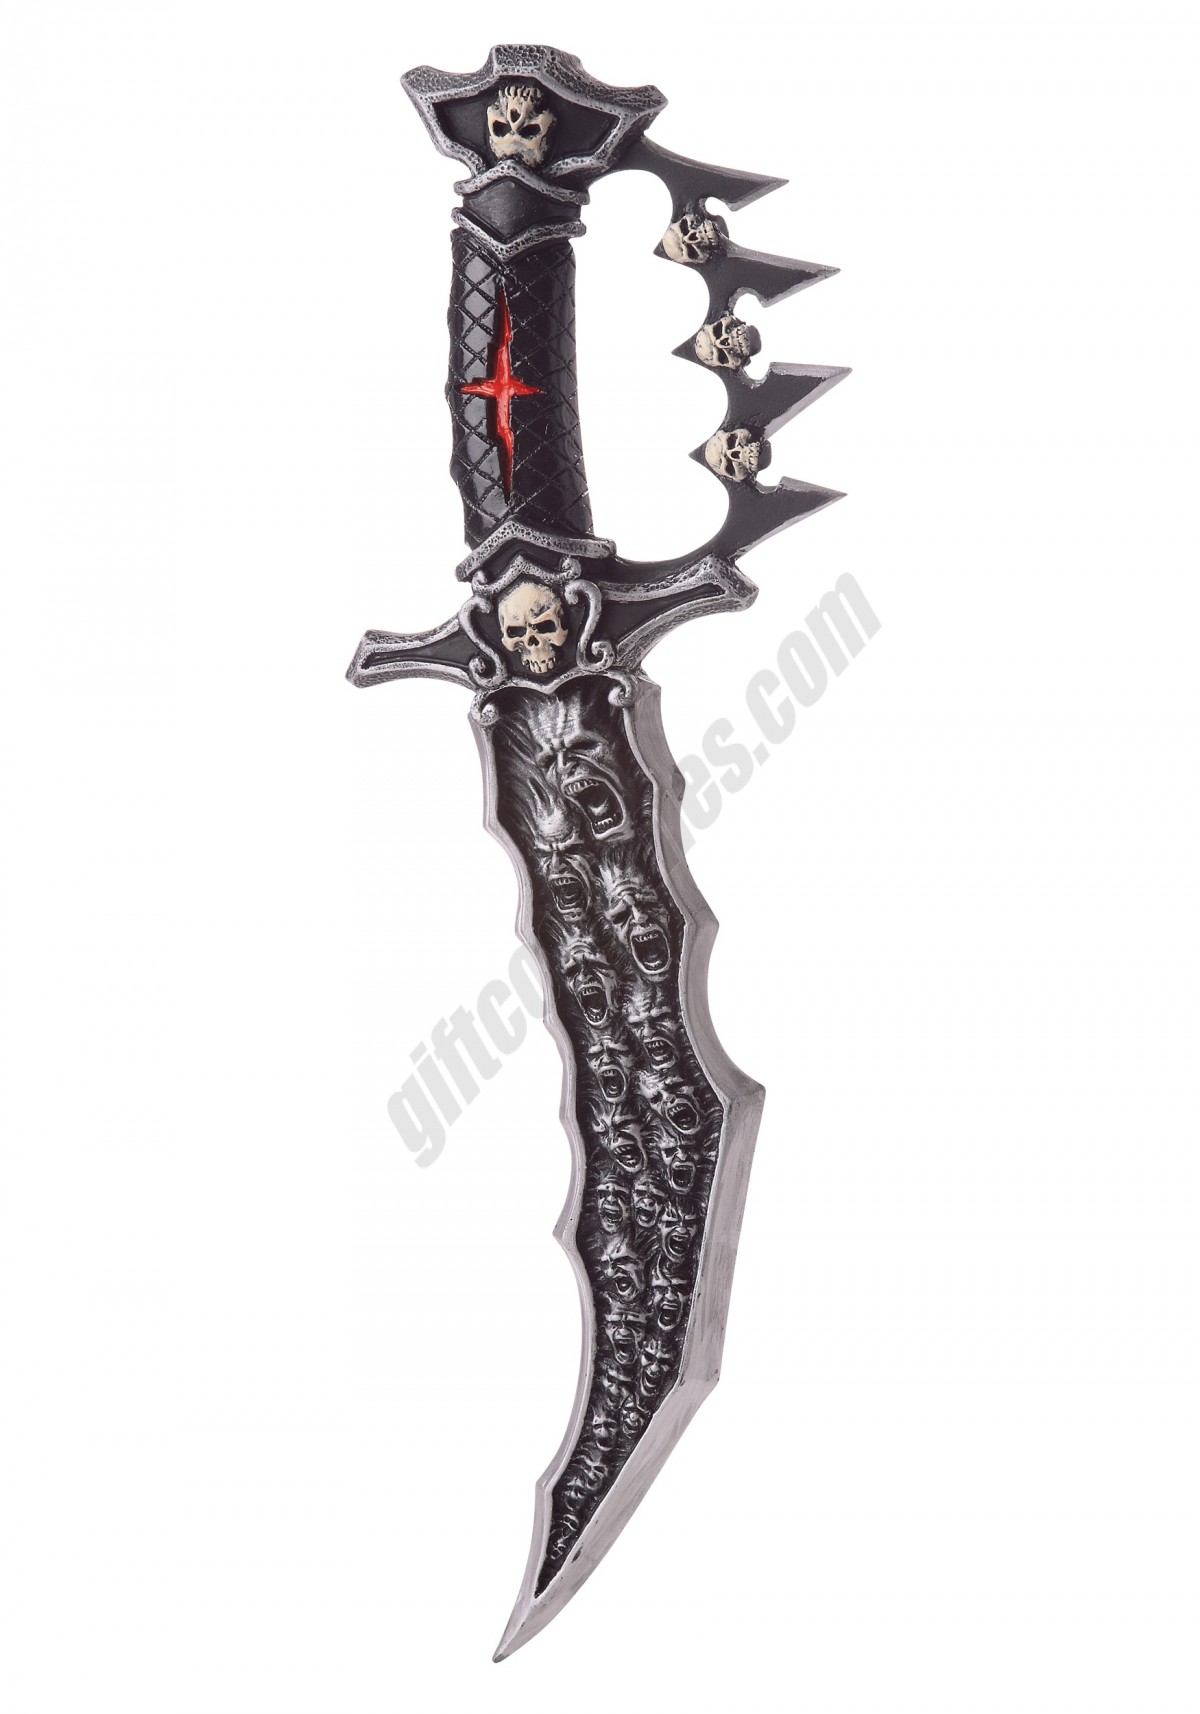 Blade of the Damned Dagger Promotions - -0